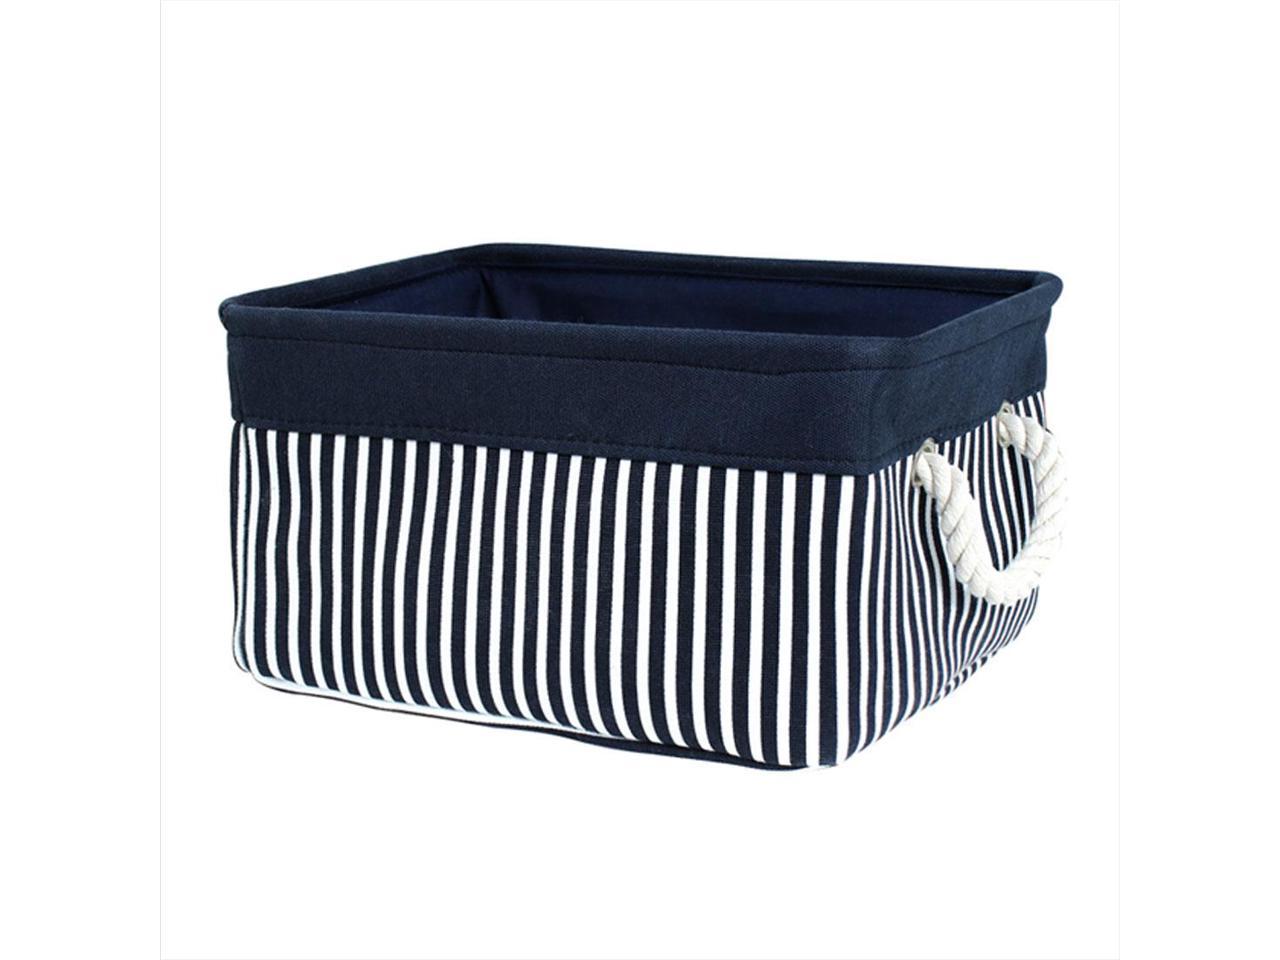 uxcell Storage Basket Bin with Cotton Handles Fabric Storage with Drawstring Closure for Clothes Towel Toys Organizer,Laundry Basket for Home Shelves Closet Gray Medium 